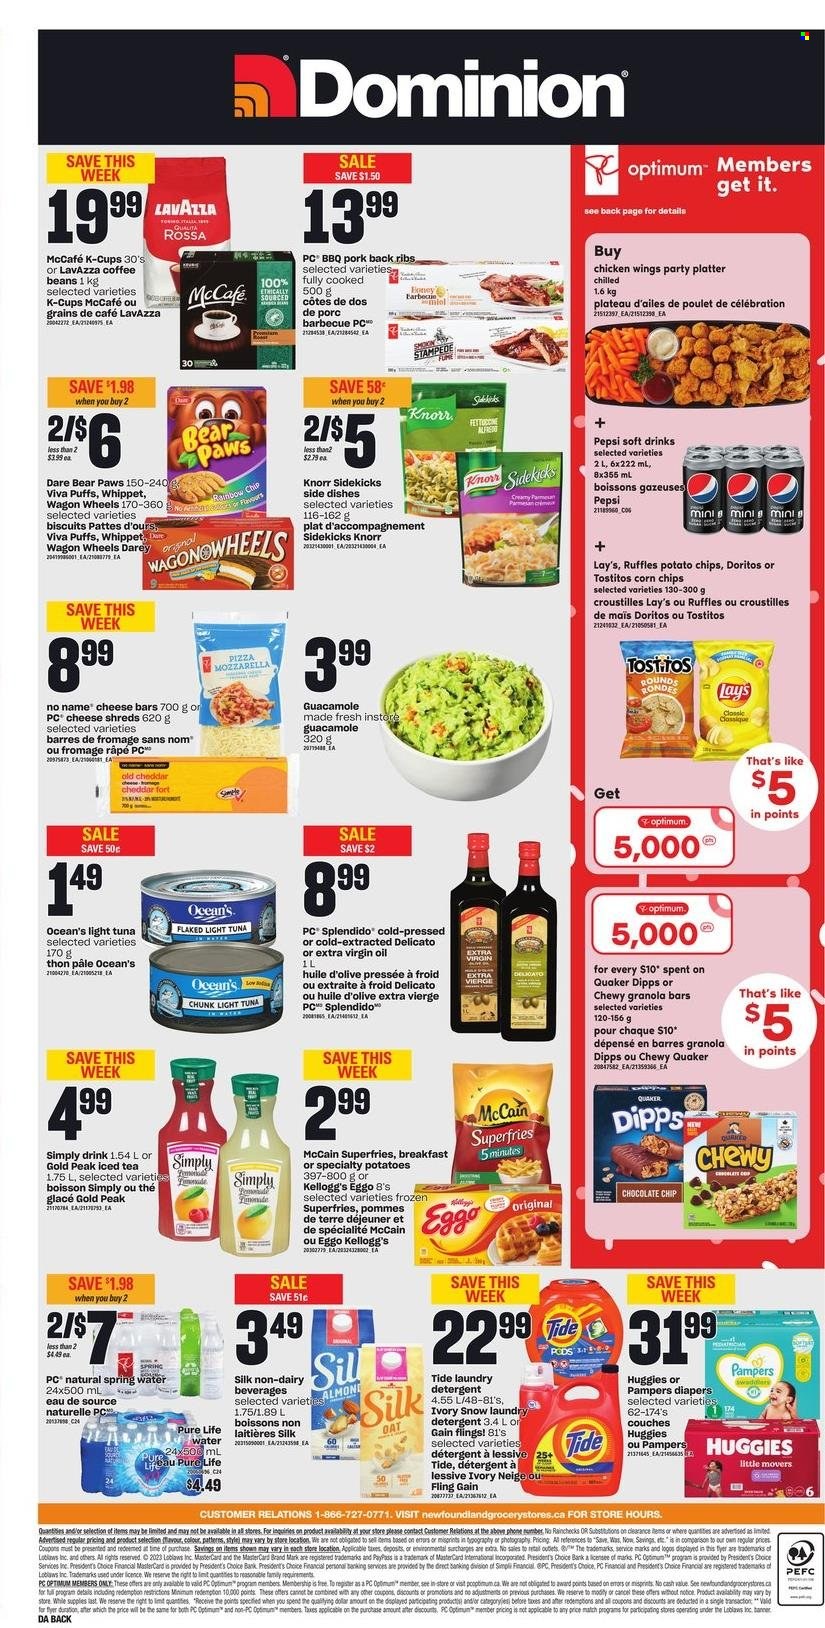 thumbnail - Dominion Flyer - February 02, 2023 - February 08, 2023 - Sales products - puffs, quince, tuna, No Name, pizza, Quaker, guacamole, parmesan, Silk, chicken wings, McCain, potato fries, Celebration, Kellogg's, biscuit, Doritos, potato chips, Lay’s, corn chips, Ruffles, Tostitos, tuna in water, light tuna, granola bar, extra virgin olive oil, oil, Pepsi, ice tea, soft drink, spring water, Pure Life Water, coffee, coffee beans, coffee capsules, McCafe, K-Cups, Lavazza, ribs, pork meat, pork ribs, pork back ribs, Pampers, nappies, Gain, Tide, laundry detergent, Paws, Optimum, wagon, detergent, Huggies, Knorr. Page 3.